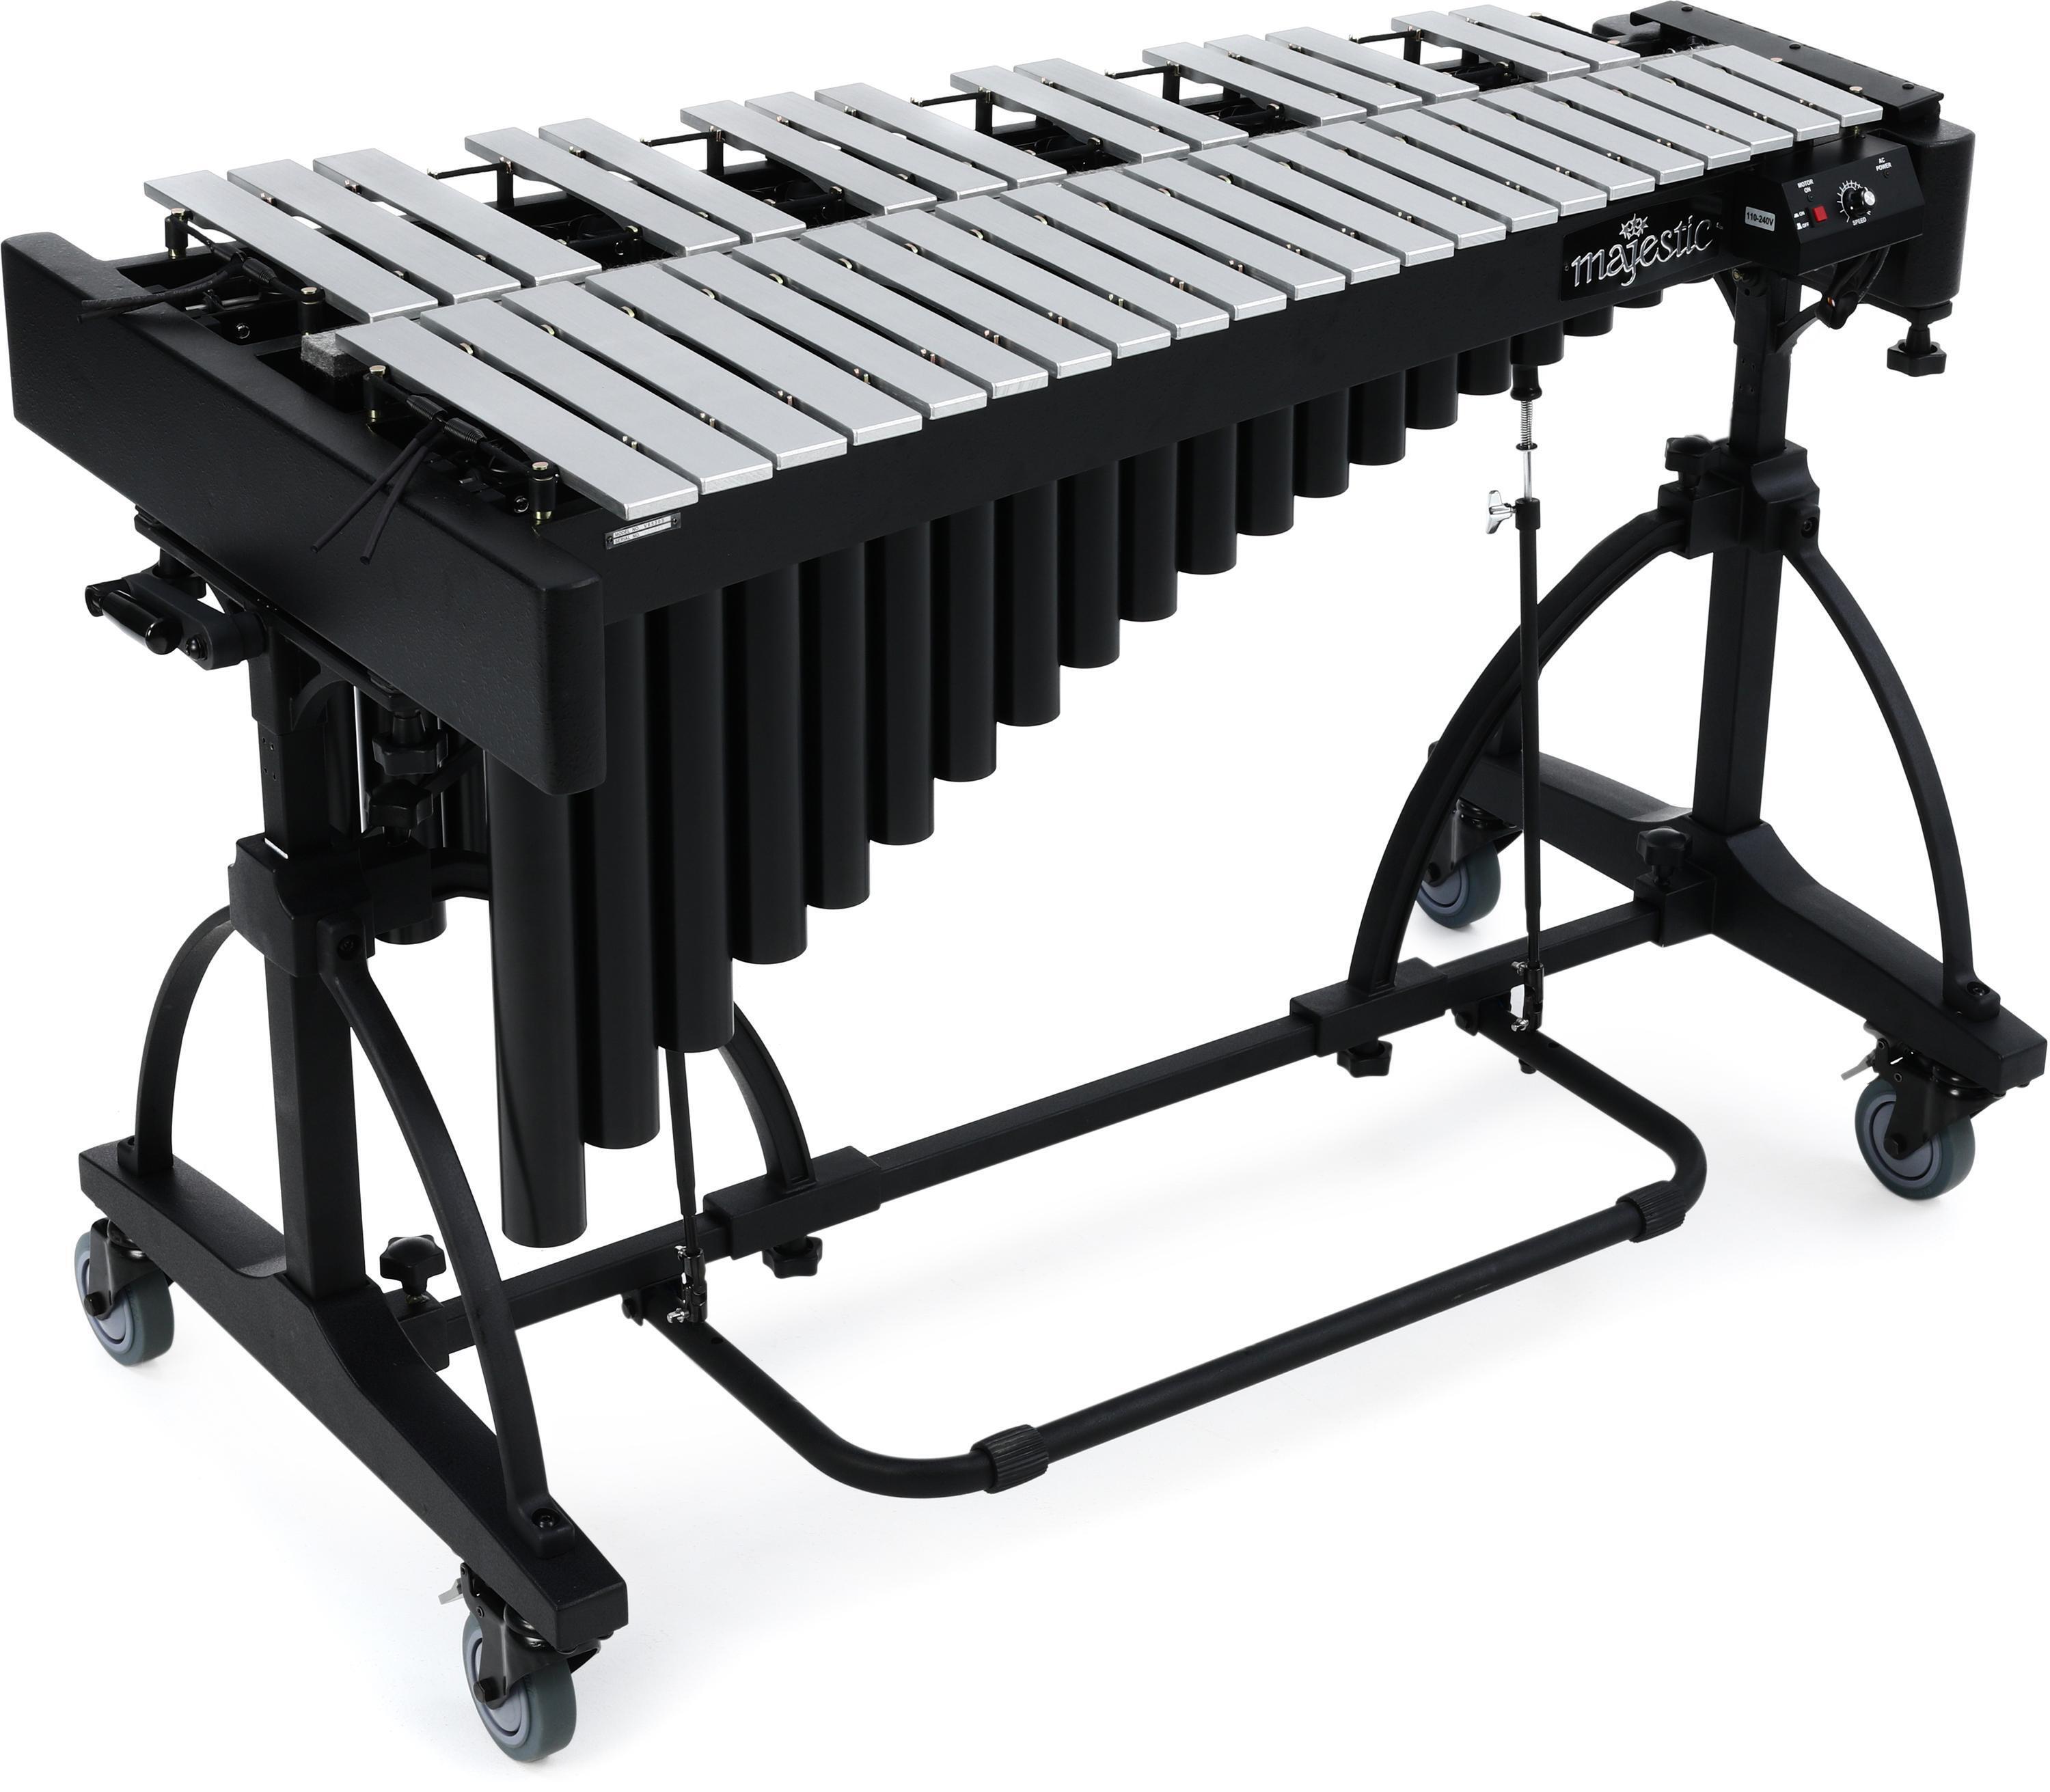 30 Note Xylophone Piano Foldable Glockenspiel Vibraphone With